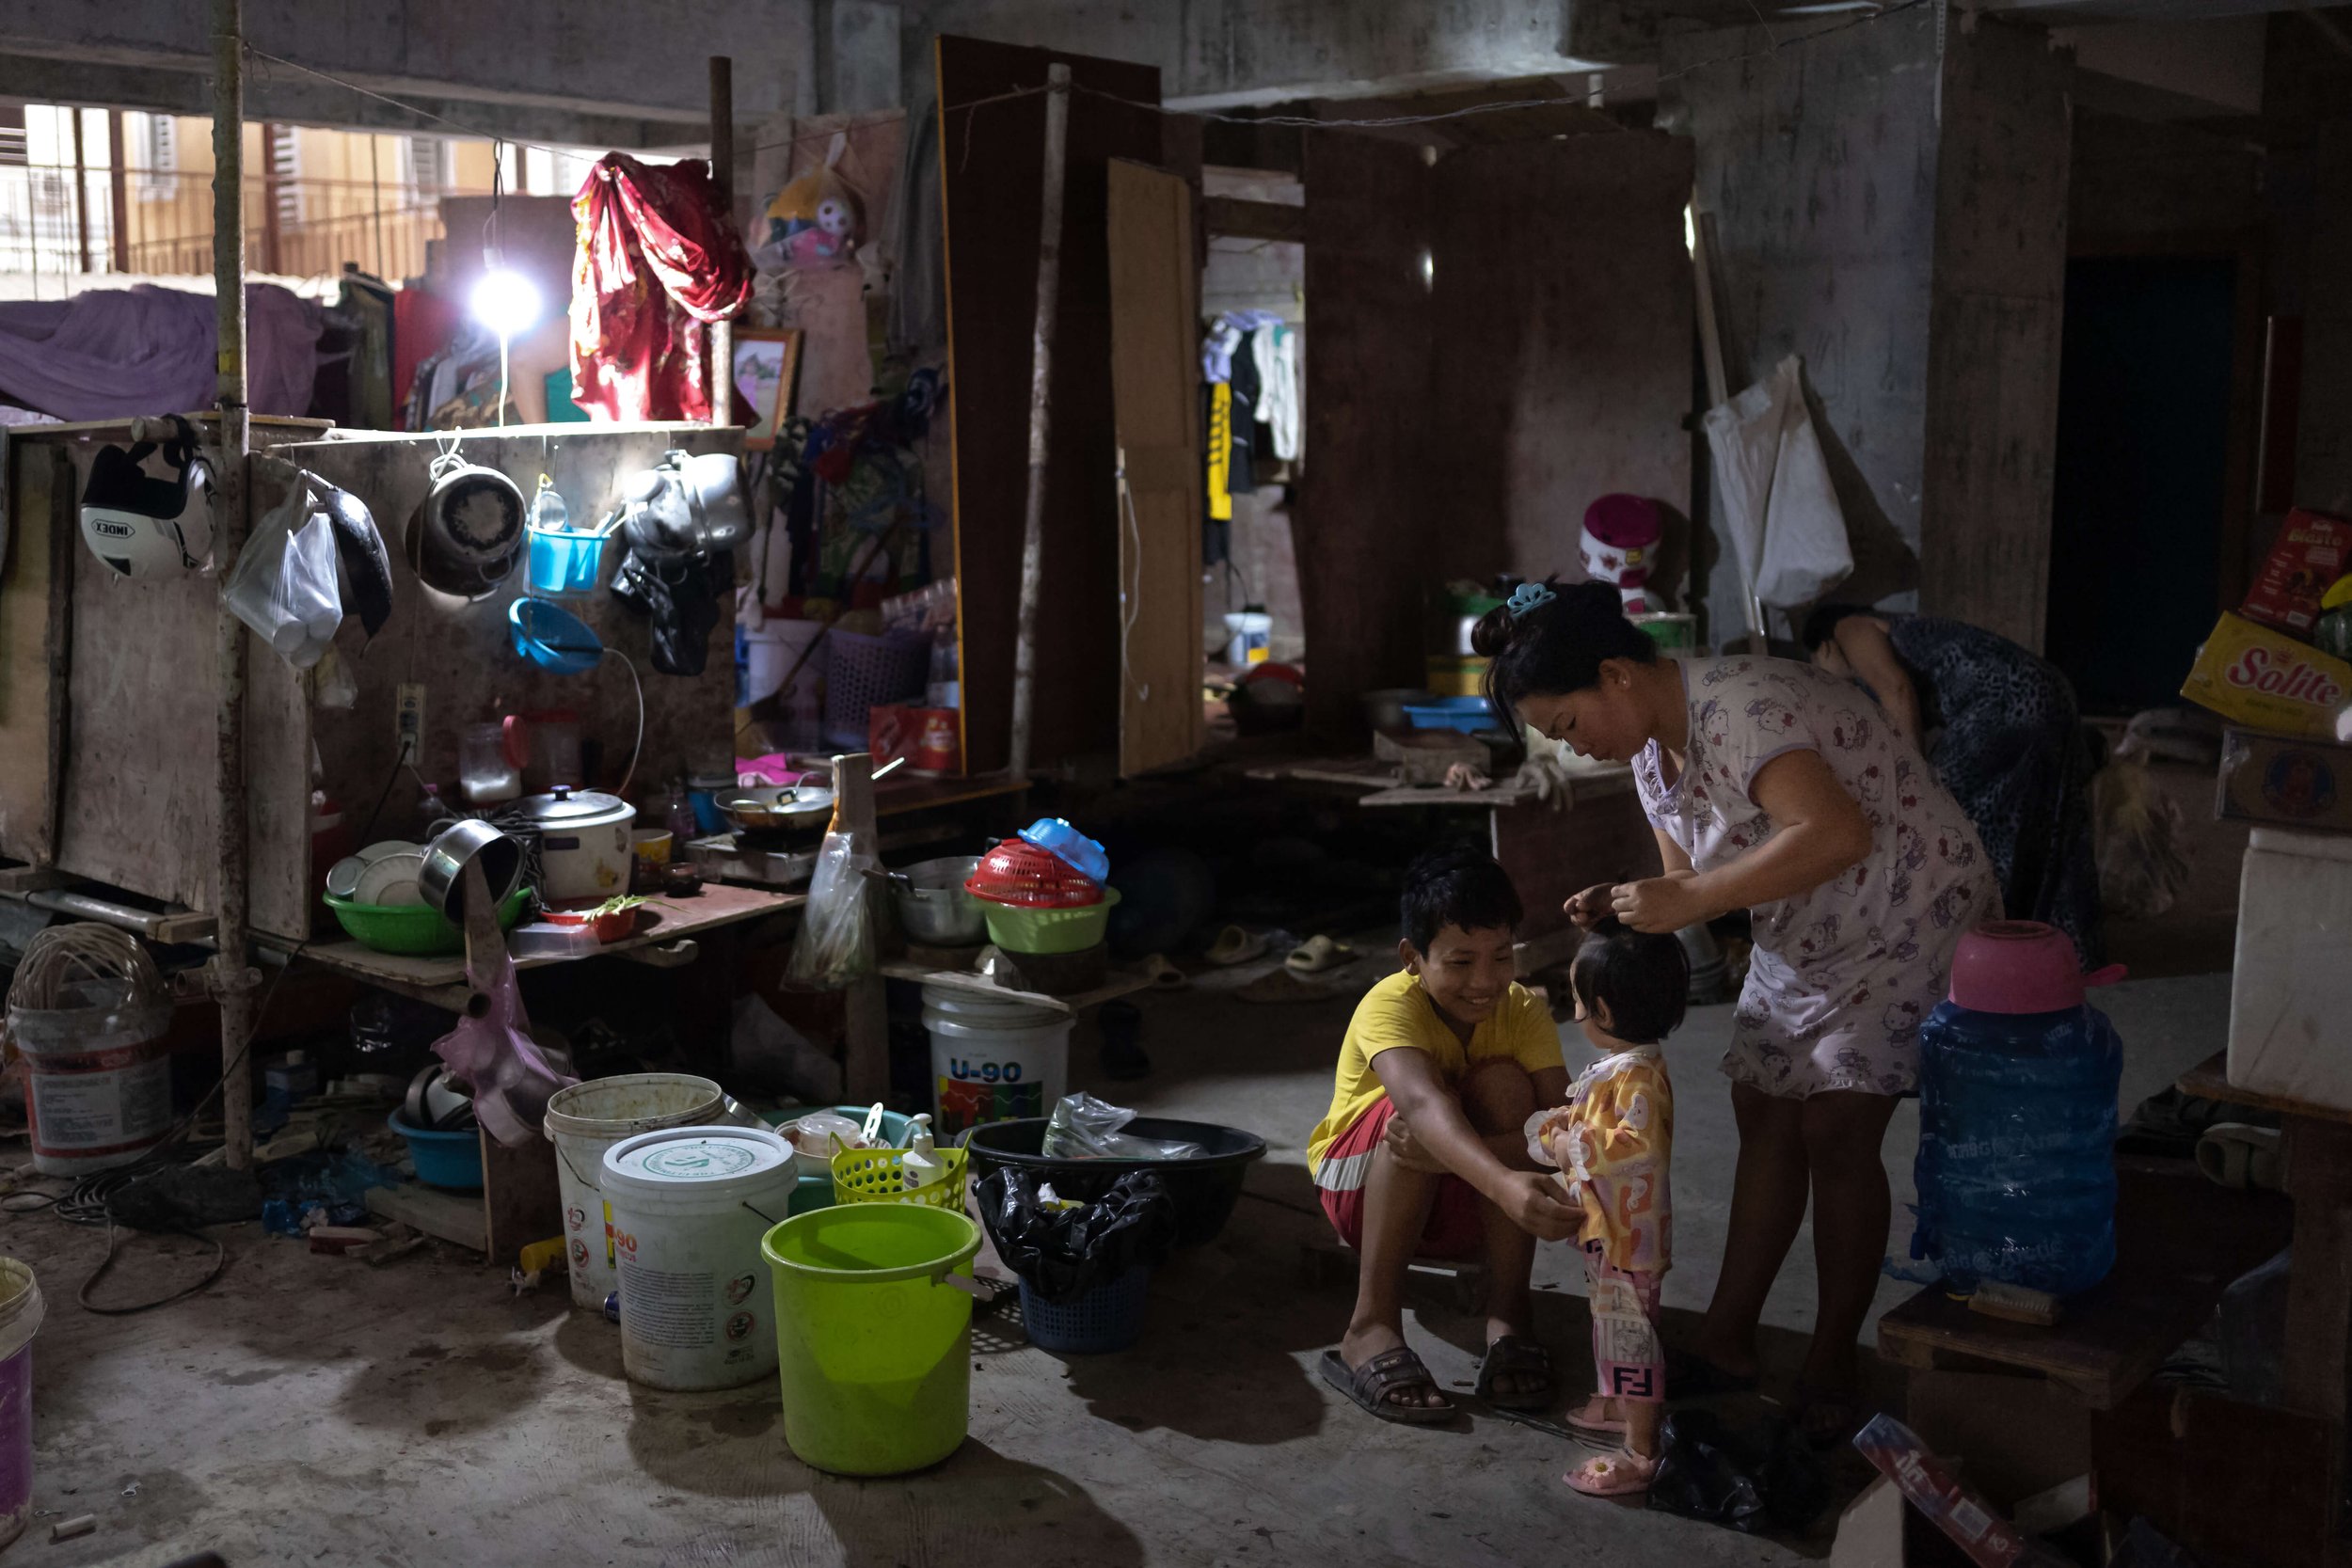  A family living on the site at Bassac lane. An estimated 50 workers live on-site, some with their family, in makeshift shelters made from scaffolding and wood. 